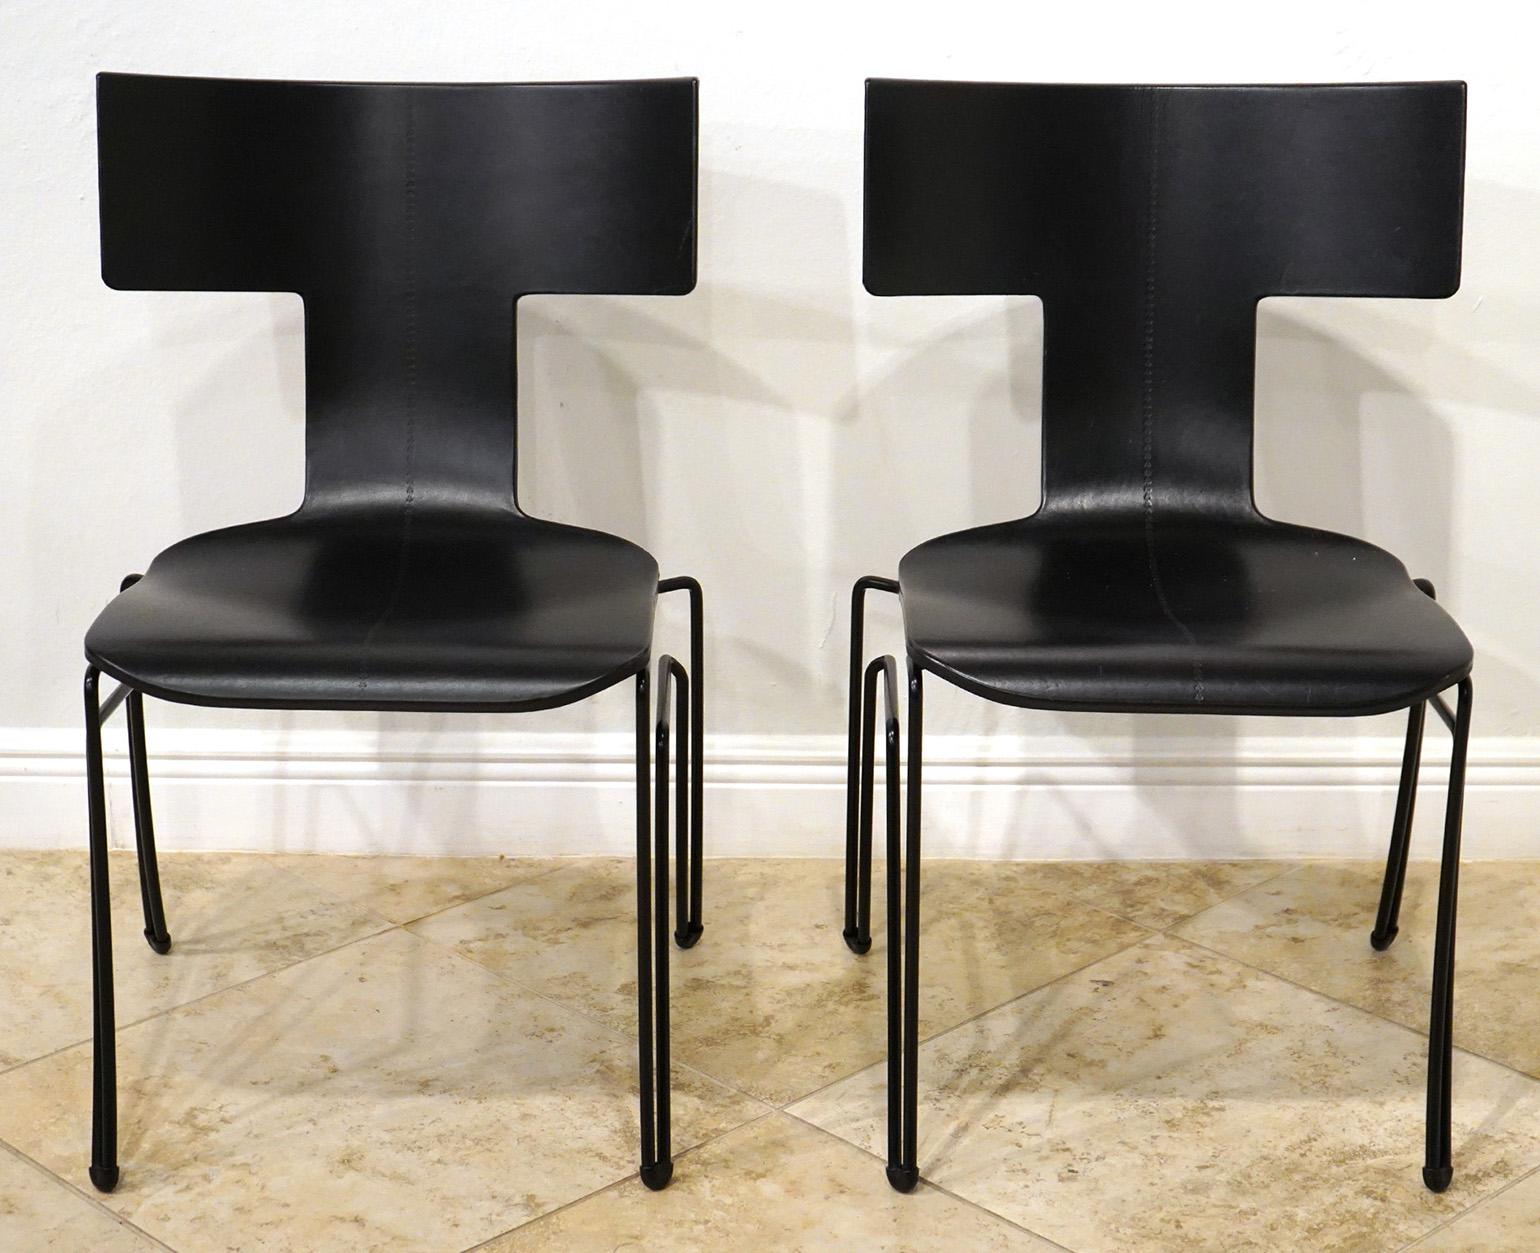 Pair of 'Anziano Klimos' chairs by John Hutton for Donghia. Marked on bottom. Price is for 2 chairs. Wrapped and embossed in black leather. Very good pre owned condition. 